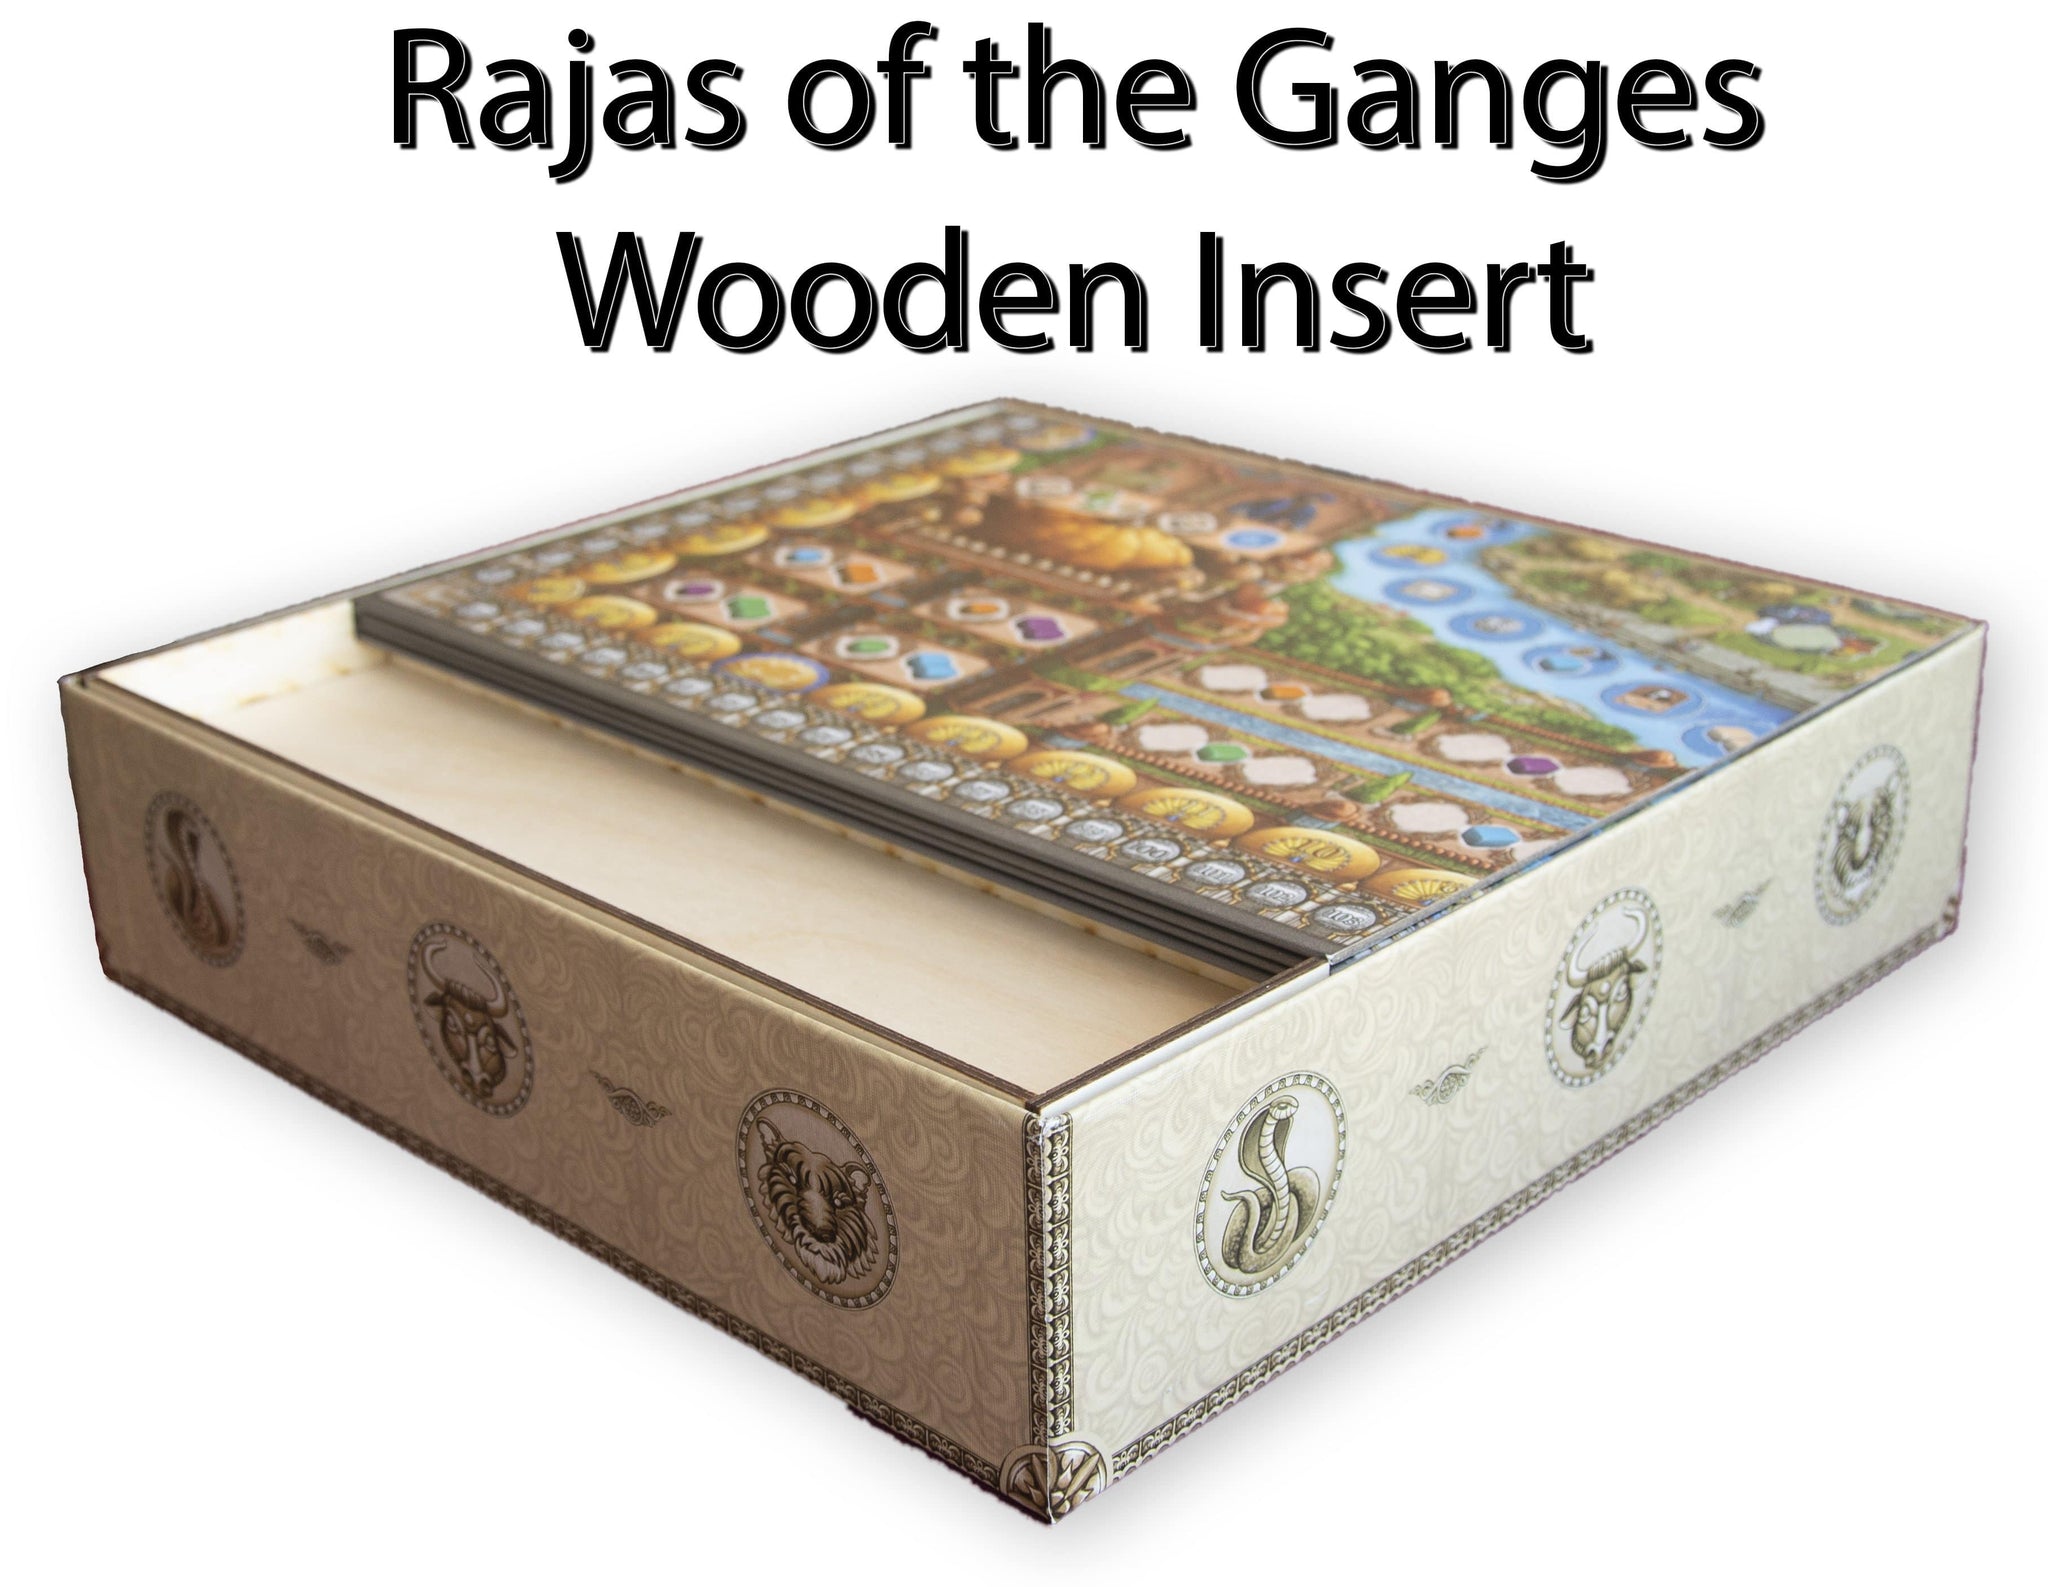 Rajas of the Ganges Wooden Insert/Organizer - The Nifty Organizer